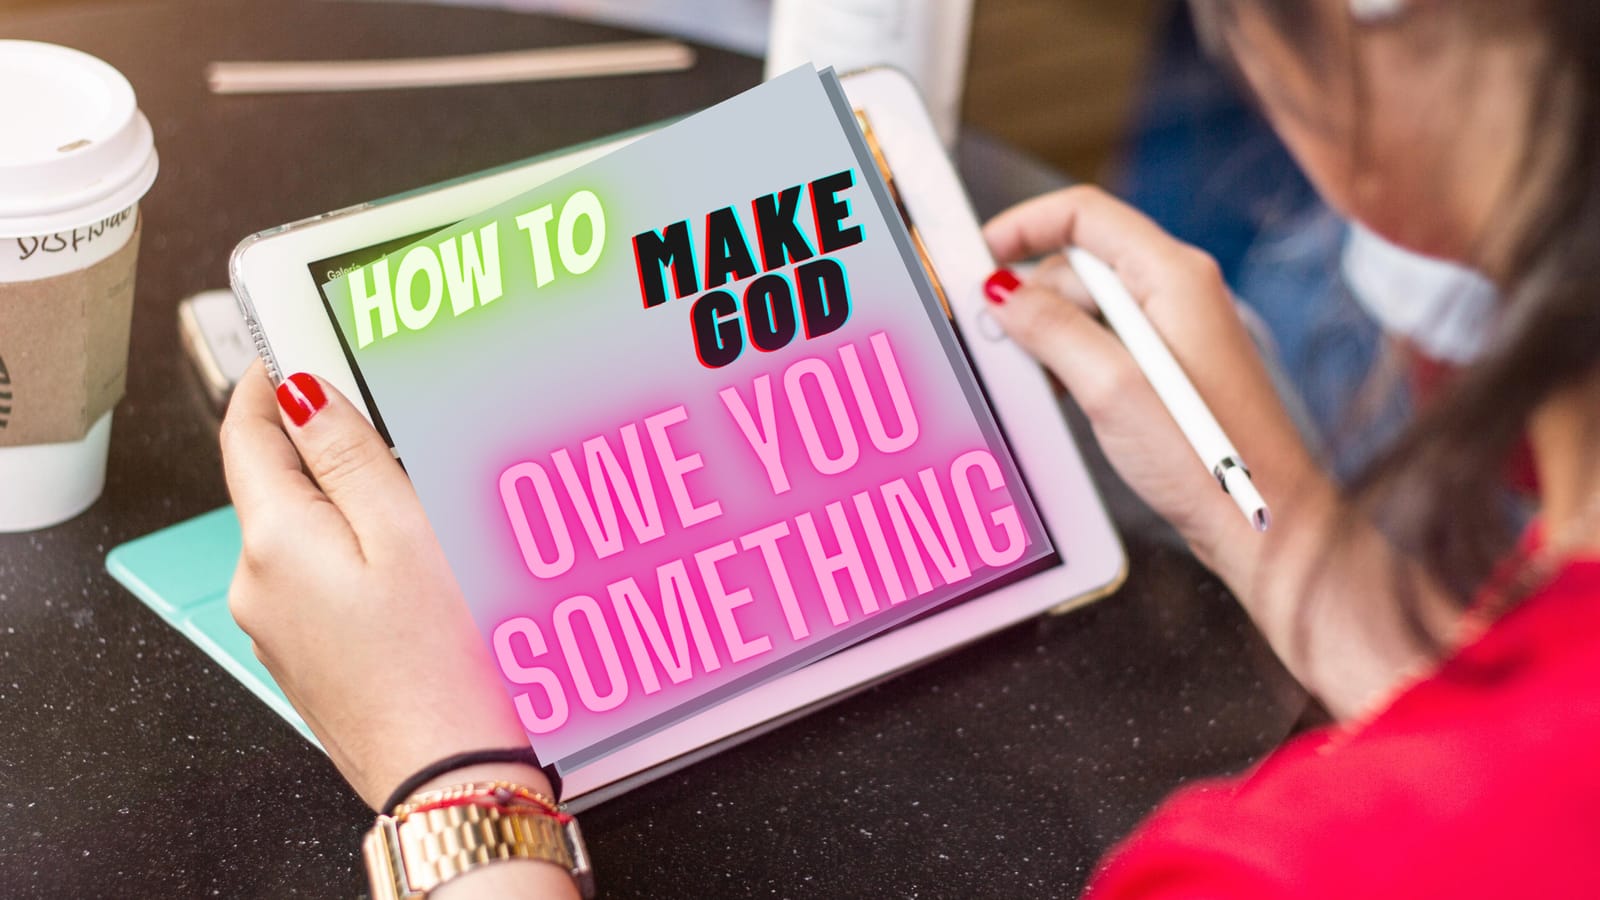 You are currently viewing HOW TO MAKE GOD OWE YOU SOMETHING